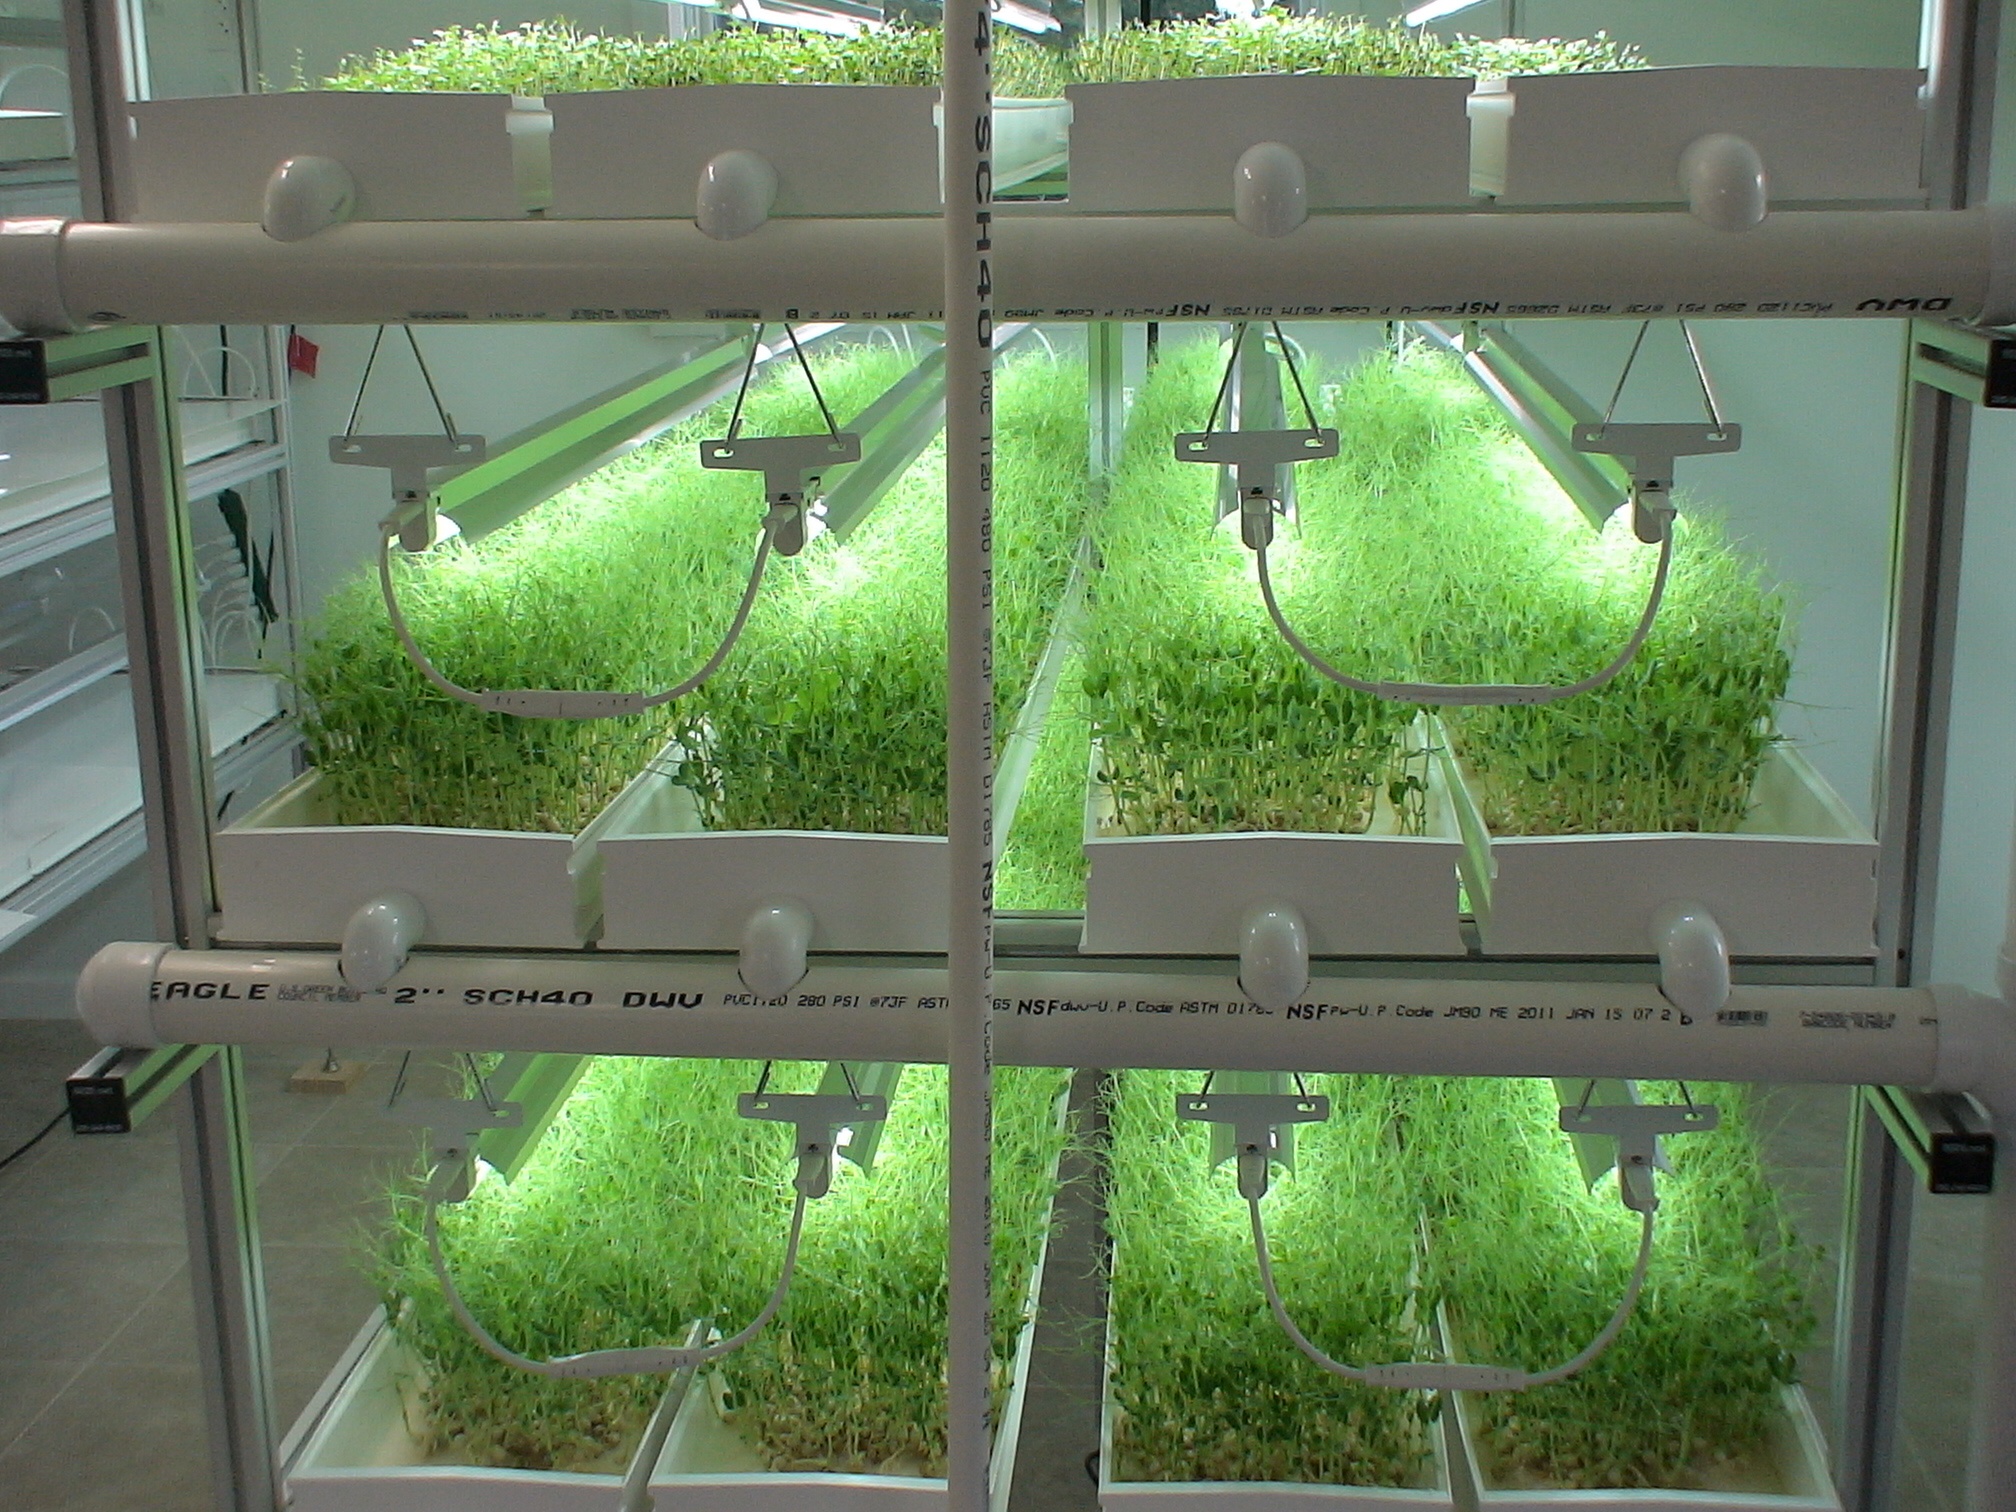 Microgreens in NFT hydroponic system | Growers Supply